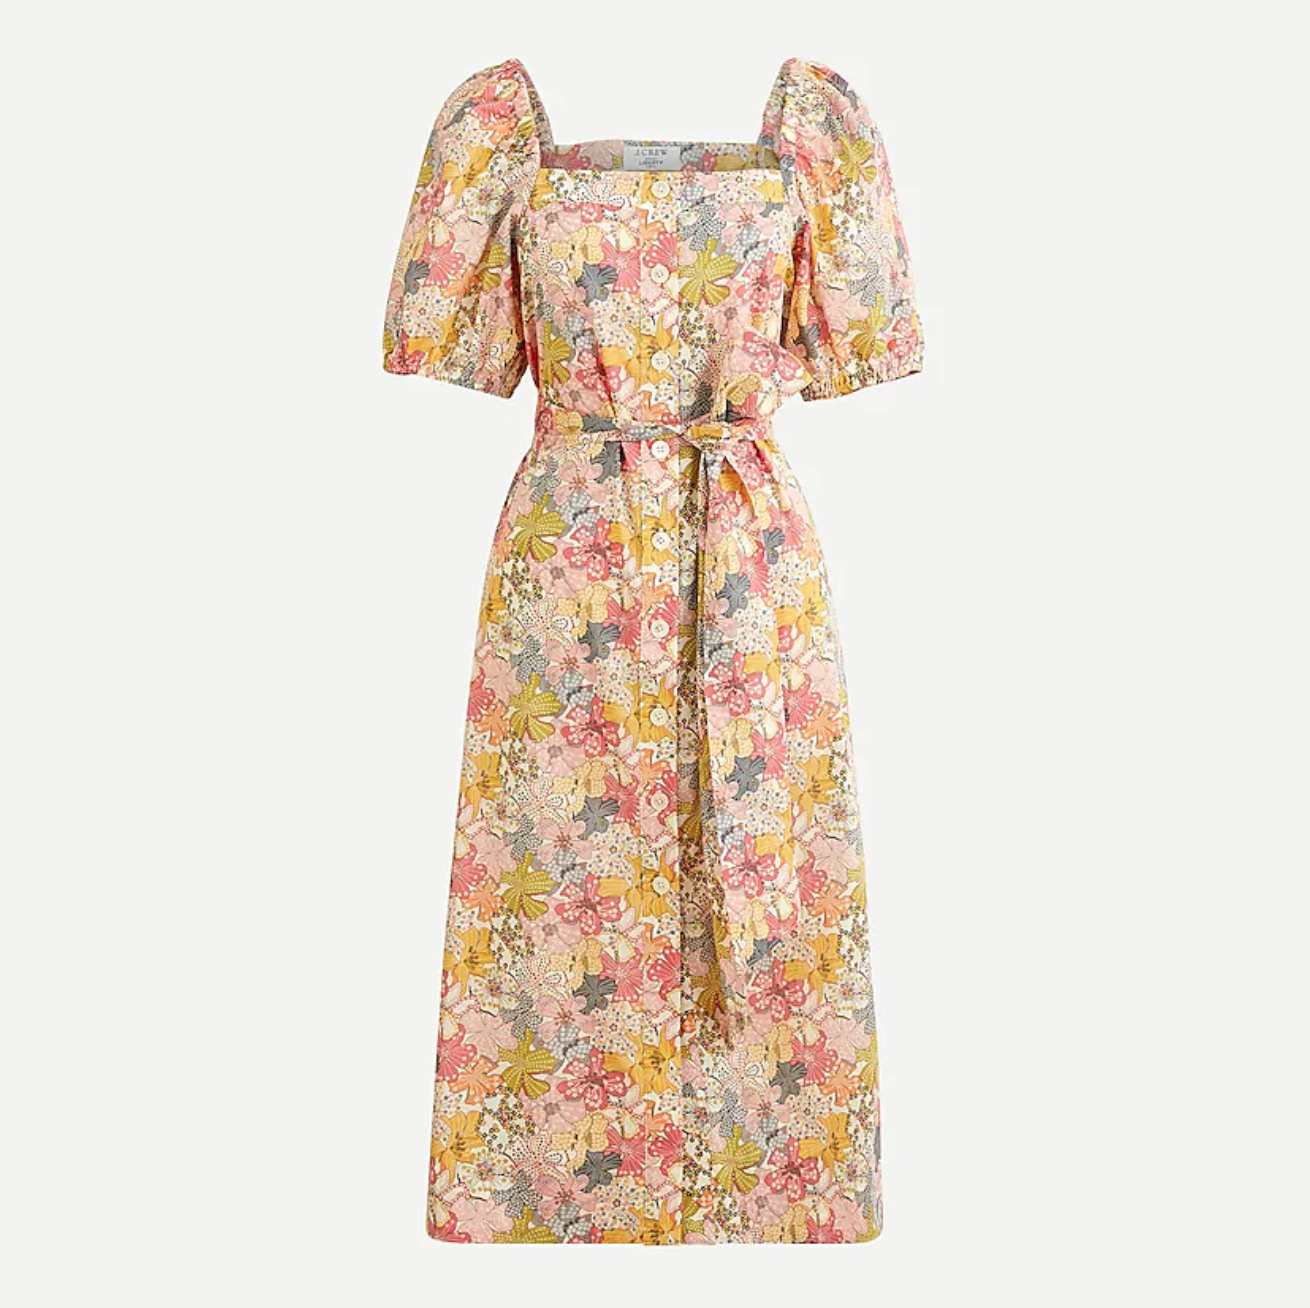 Our Summer Dress Wishlist! — Pencil & Paper Co.